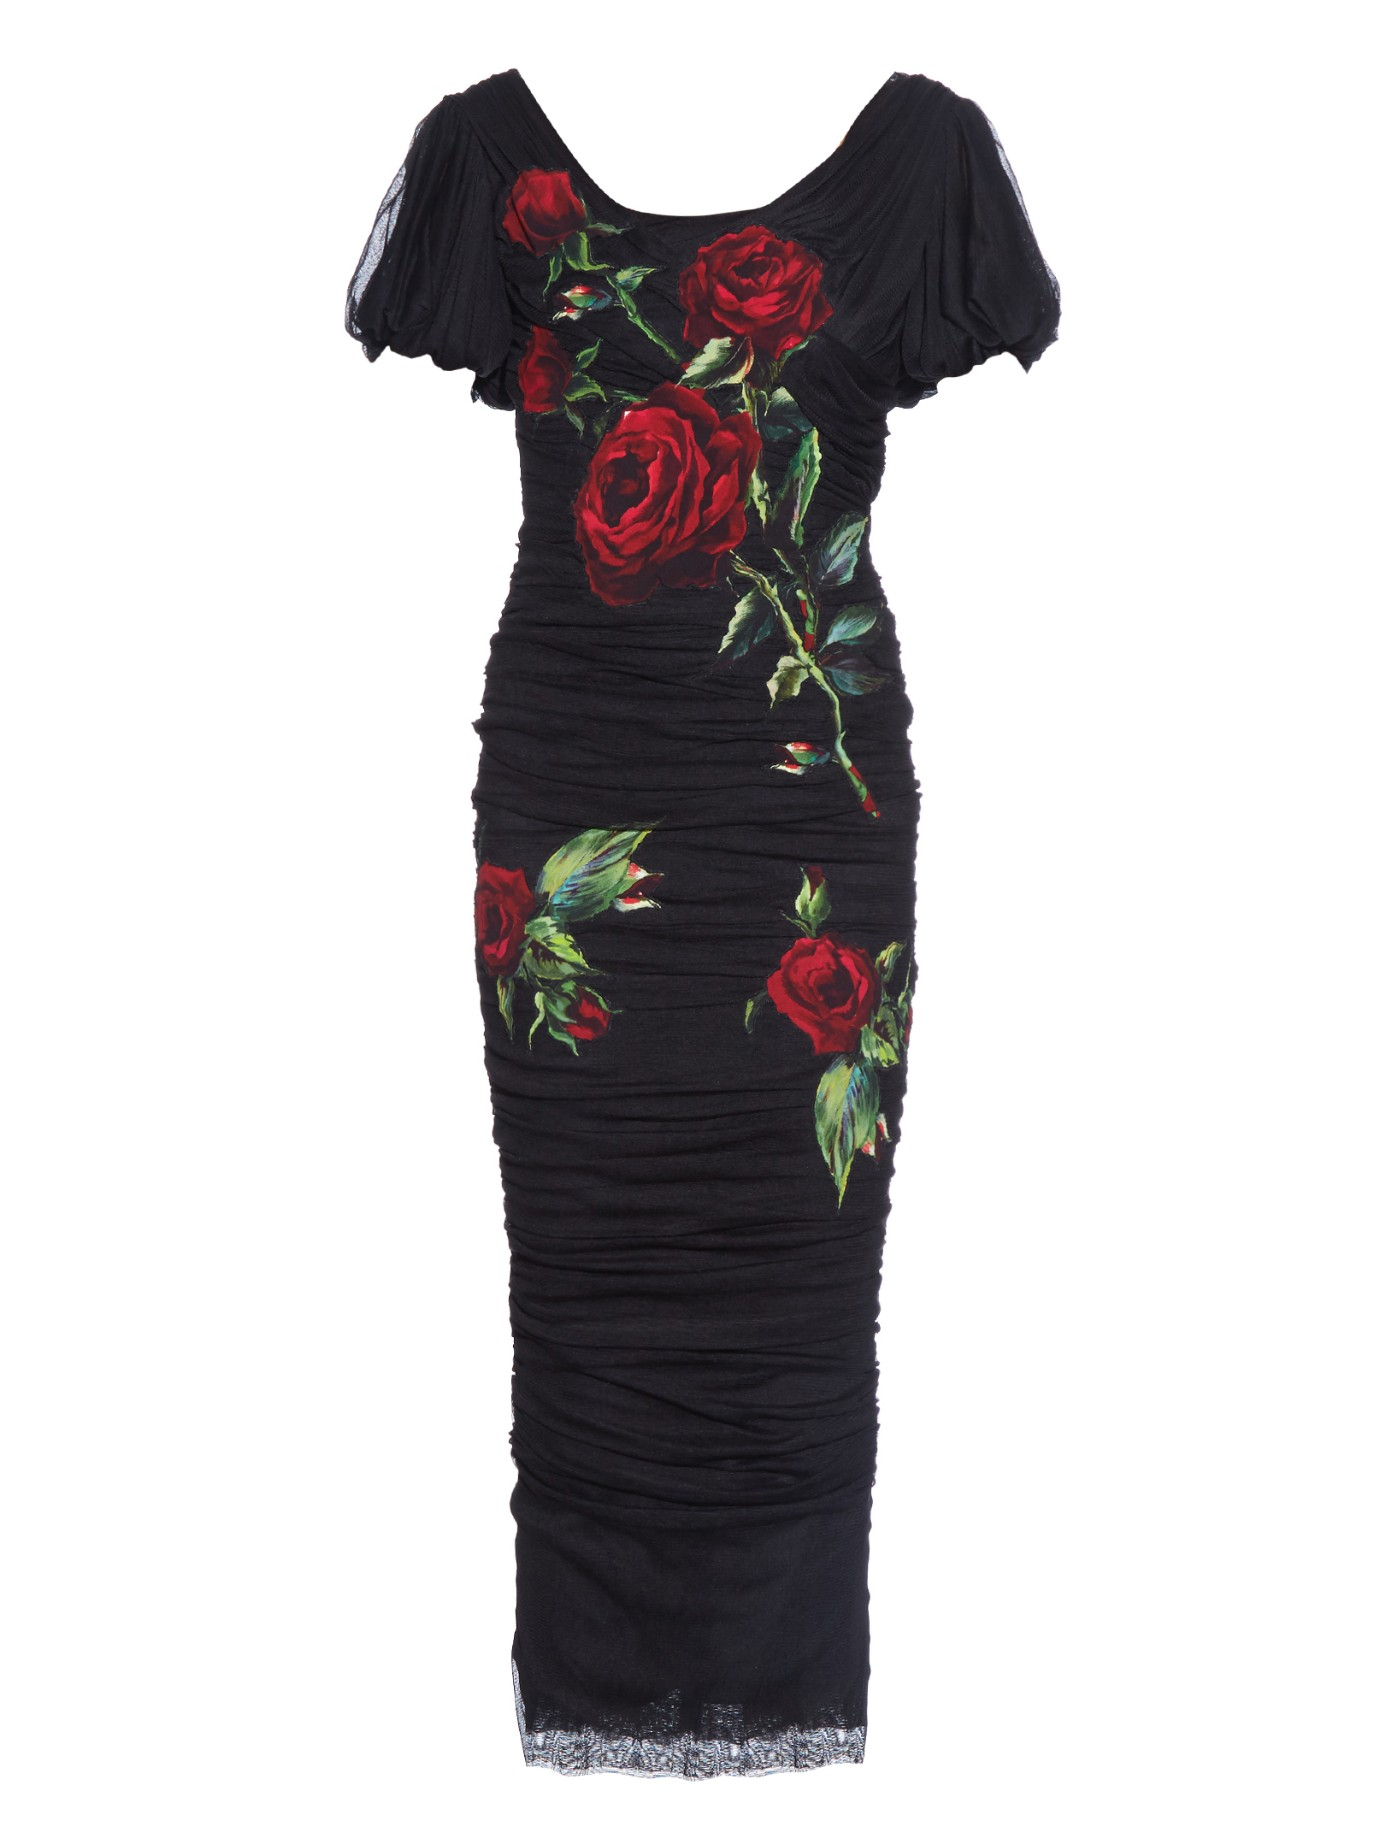 black dress with roses on it